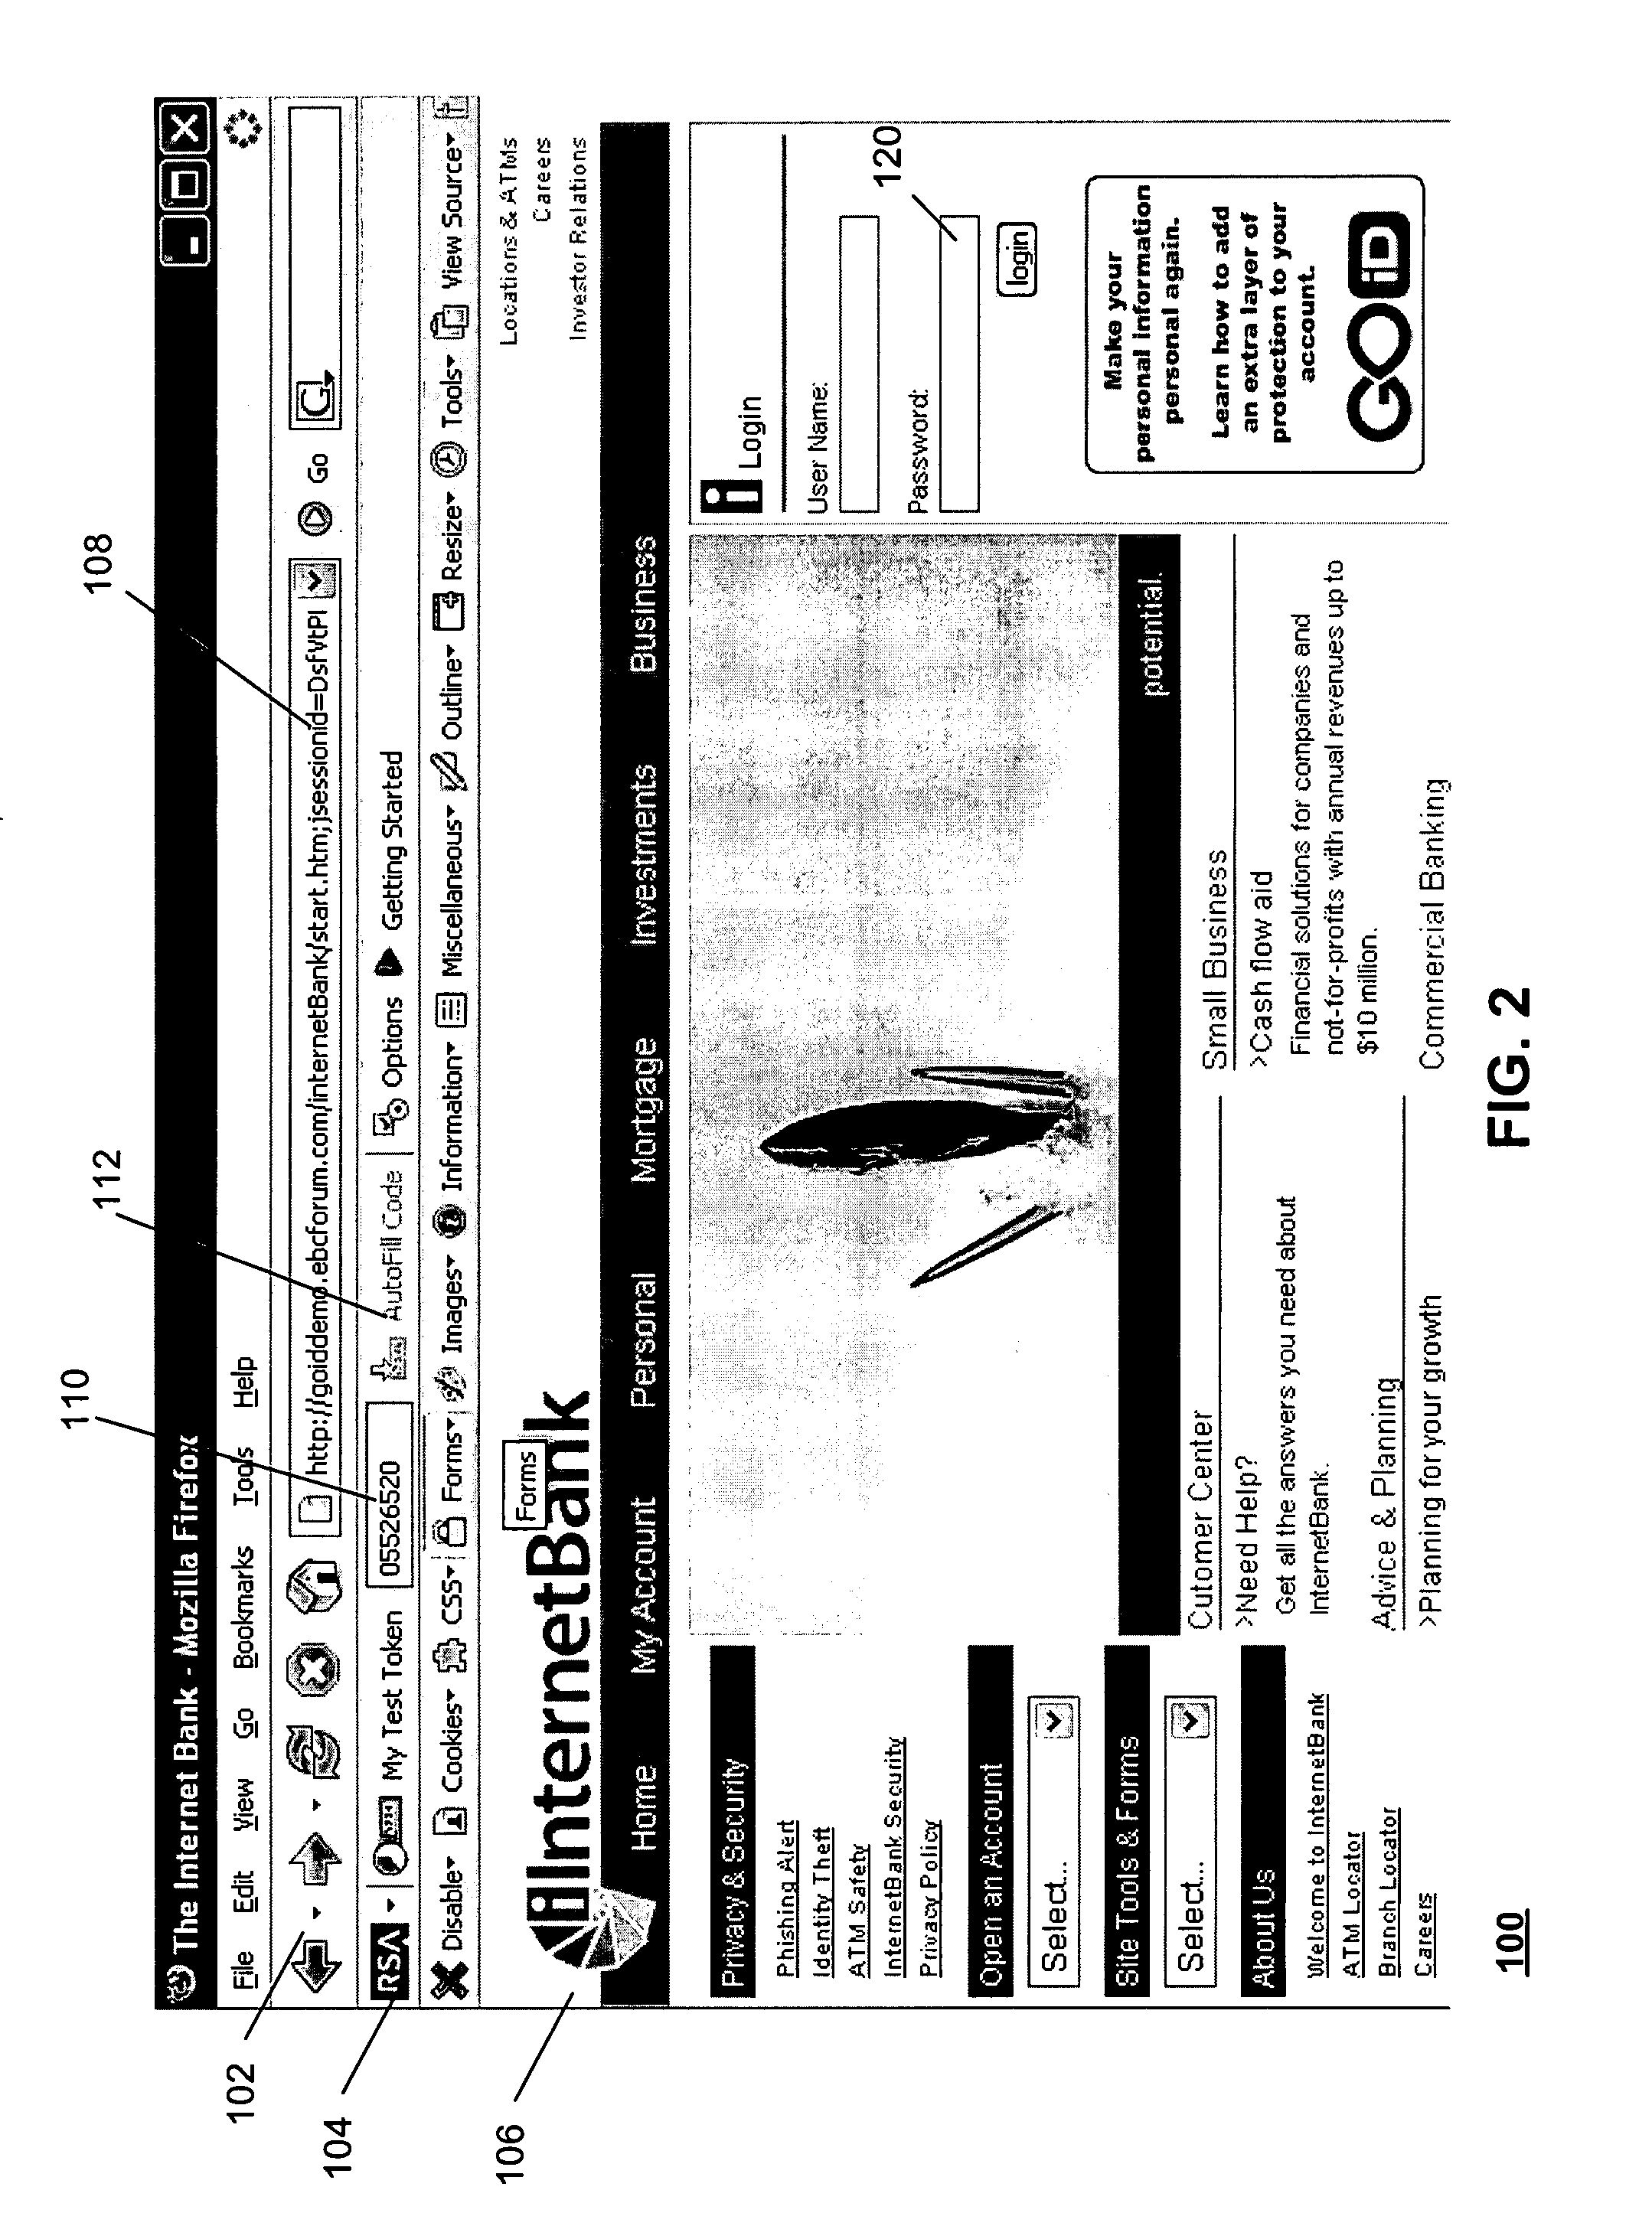 Method and system for providing a one time password to work in conjunction with a browser